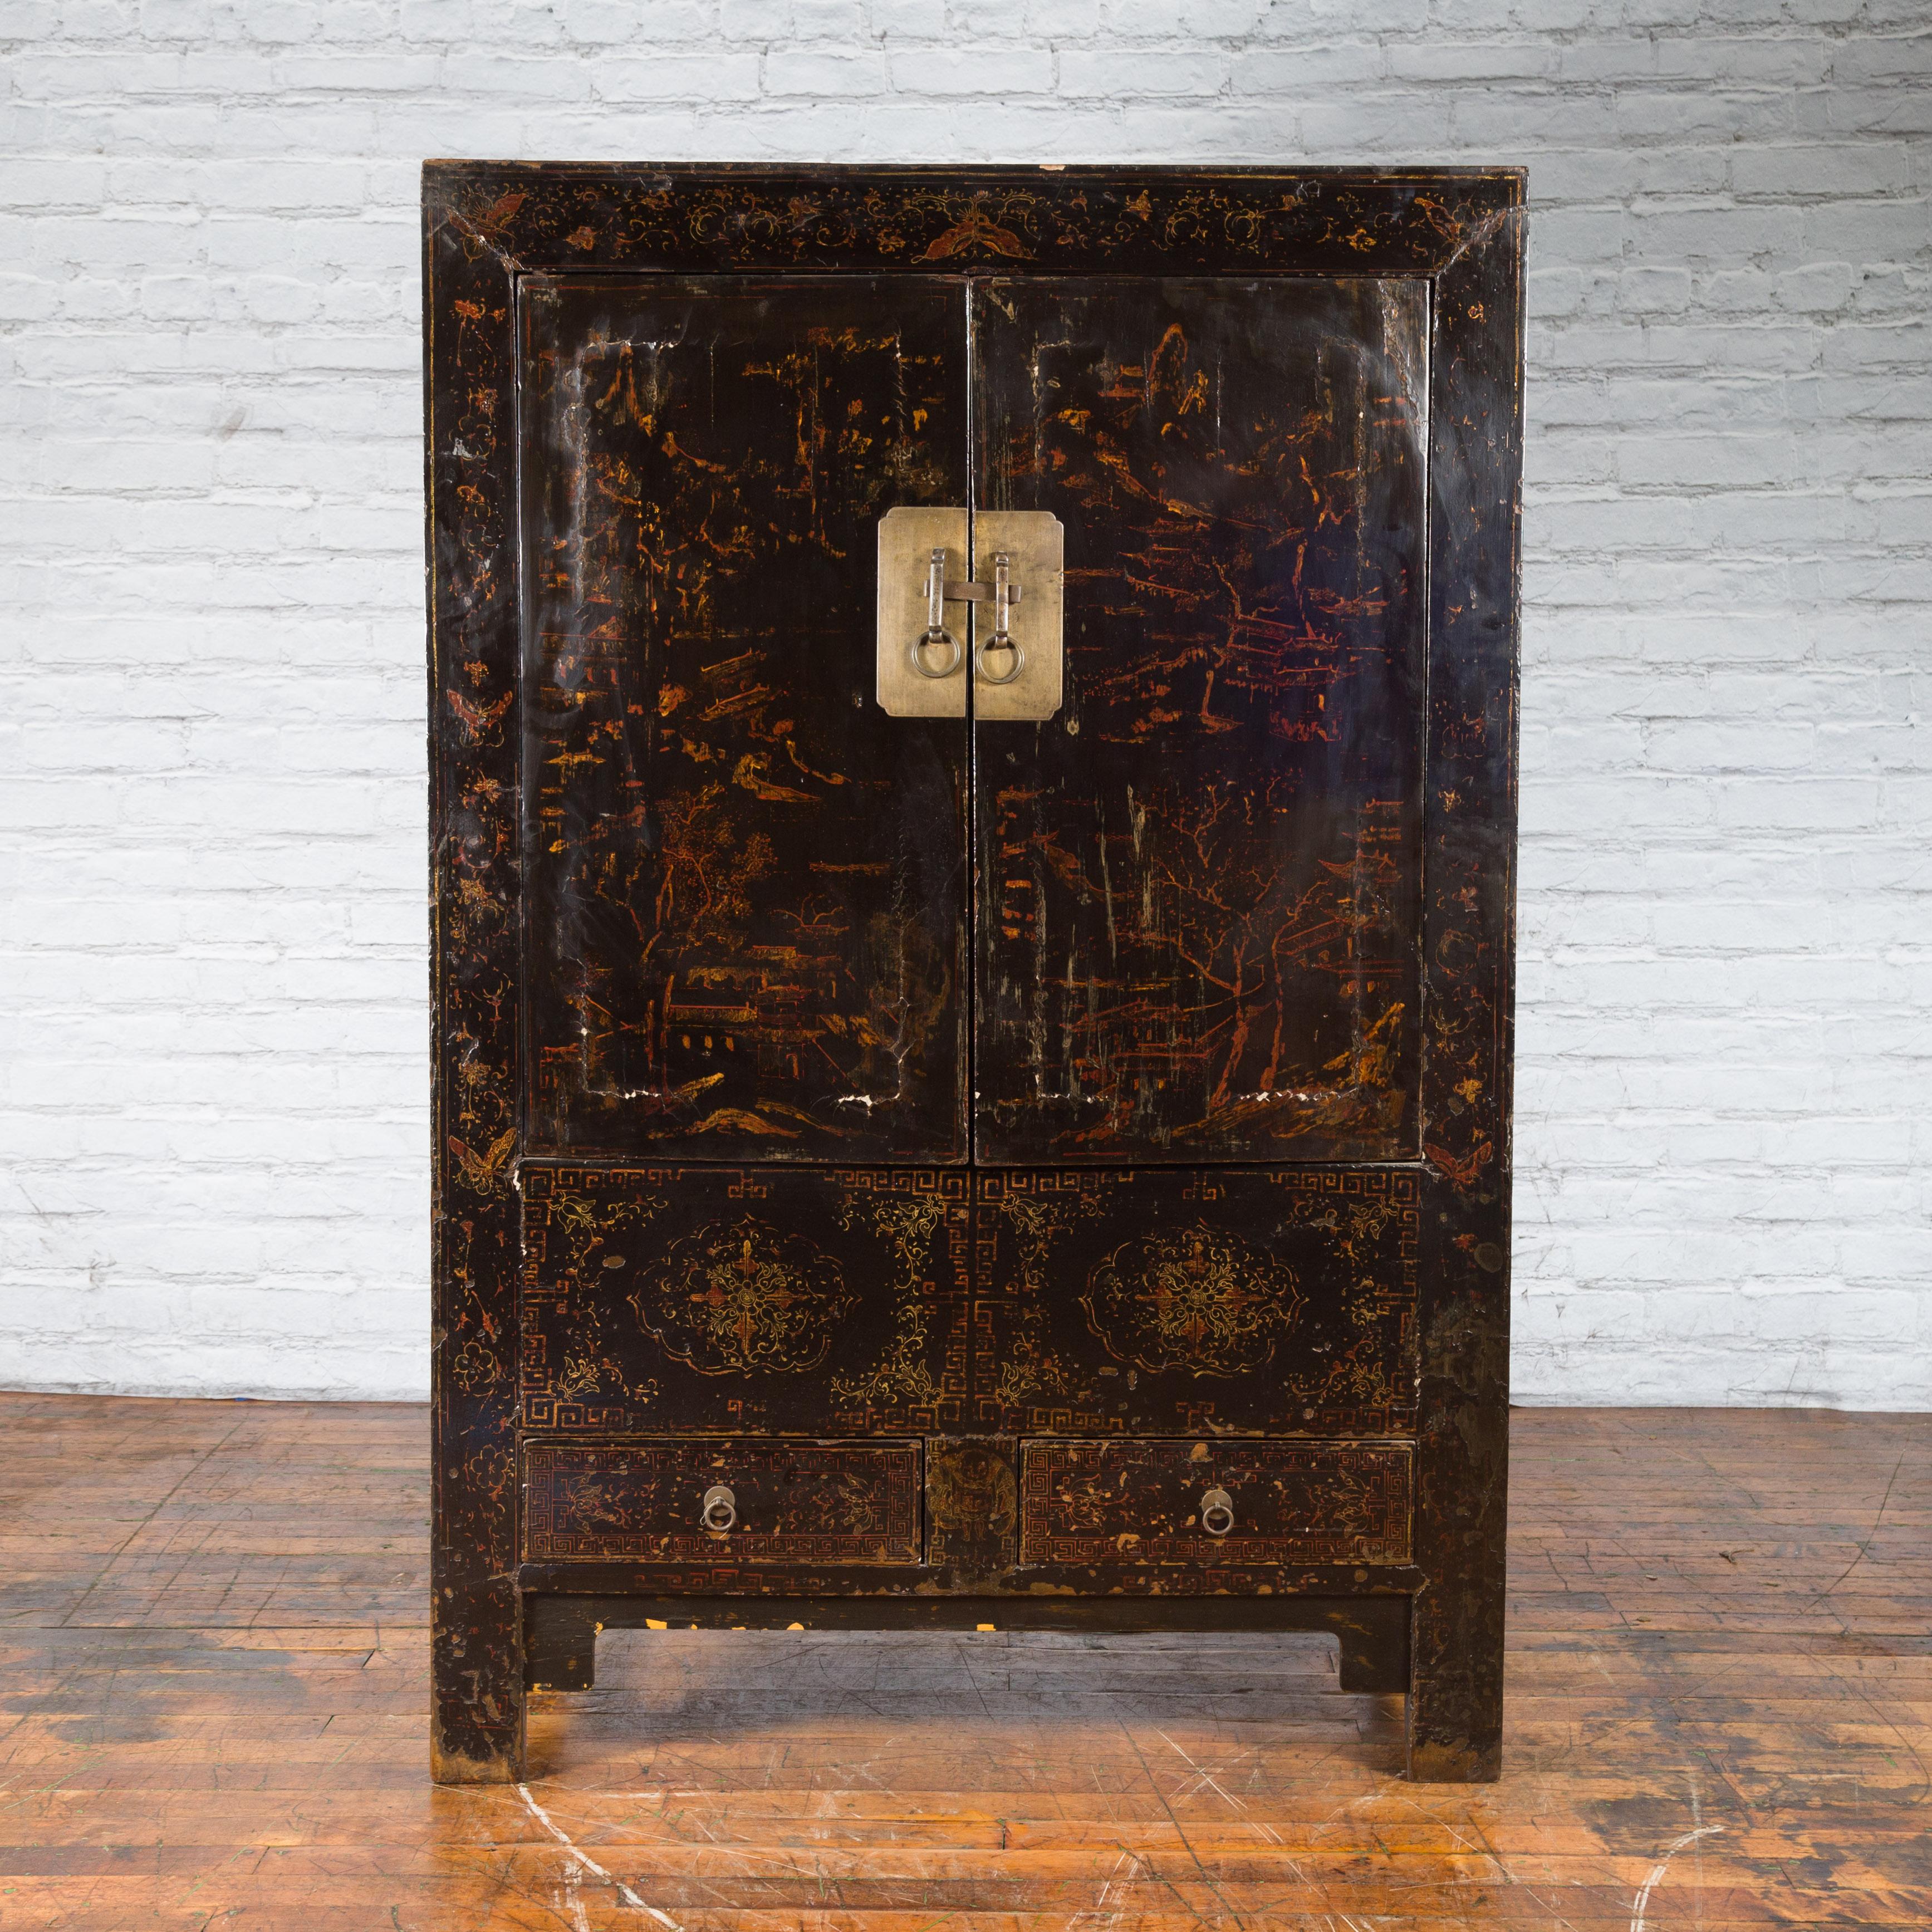 A Chinese Qing Dynasty period cabinet from the 19th century, with original black lacquer and faint hand-painted décor. Created in China during the Qing Dynasty period in the 19th century, this wooden cabinet features a linear silhouette perfectly